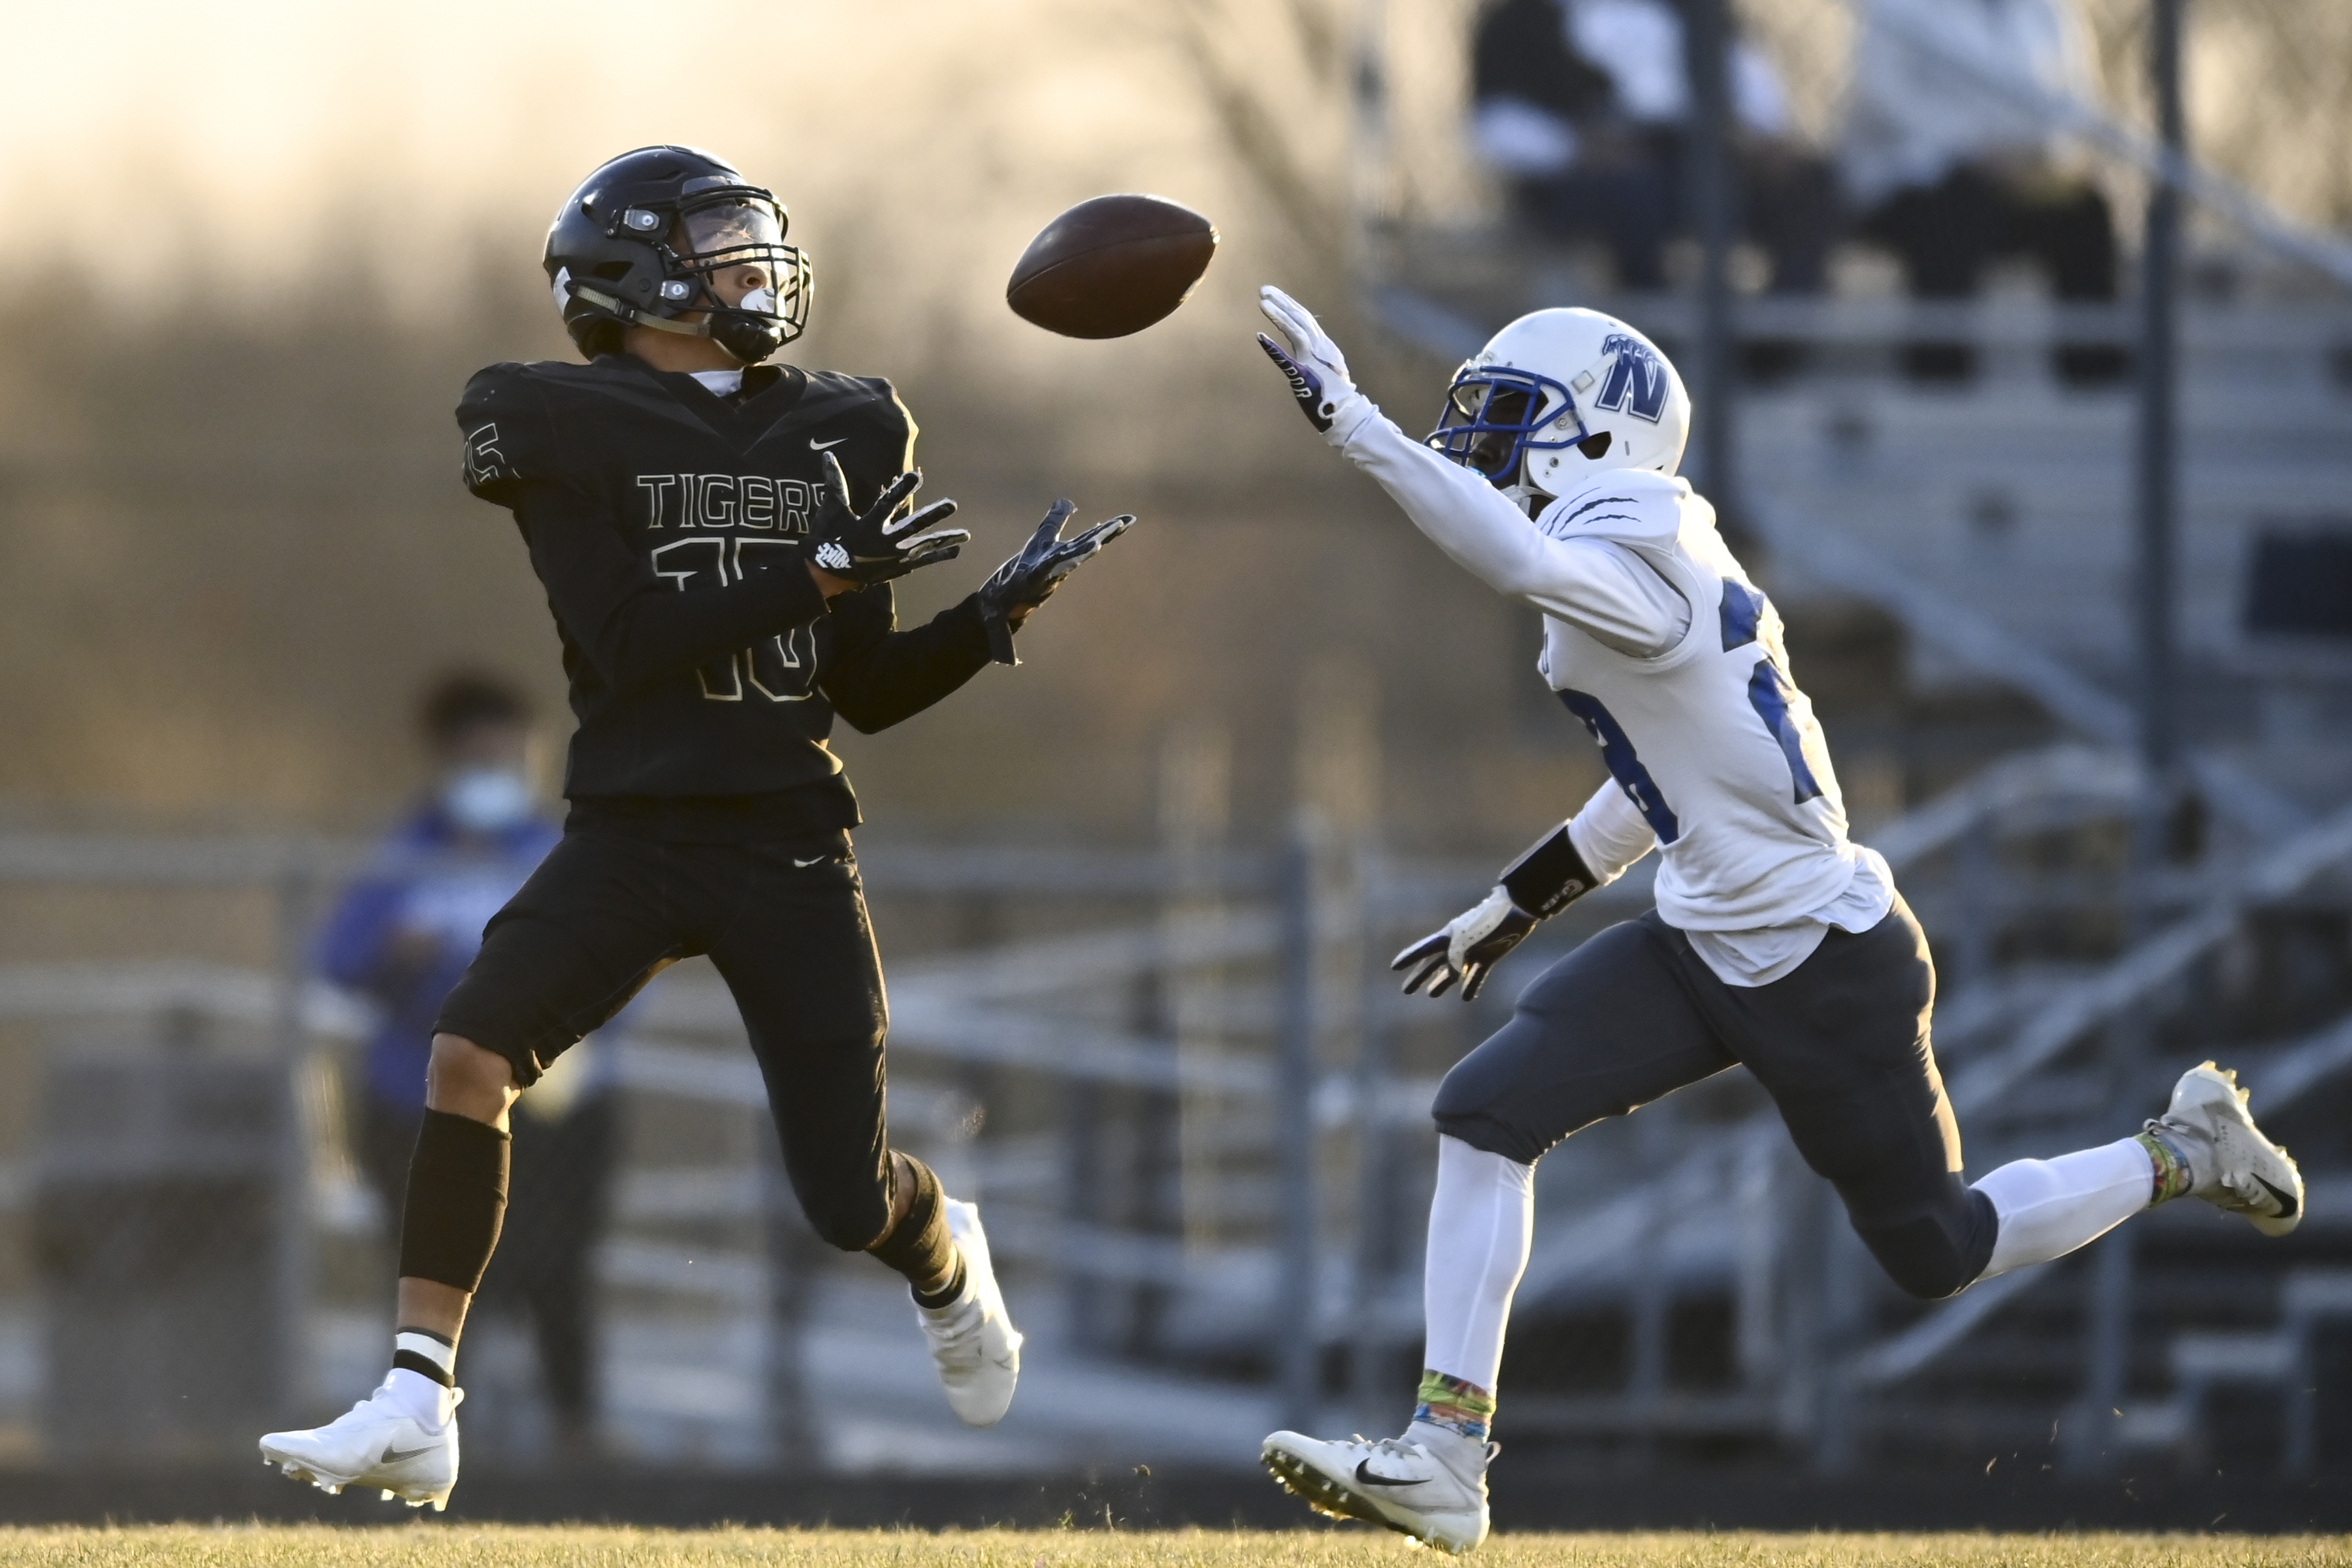 Fridley wide receiver Christian Crockett (15) caught the ball for a 46-yard completion as he was defended by Minneapolis North’s Javion Hill (28) in